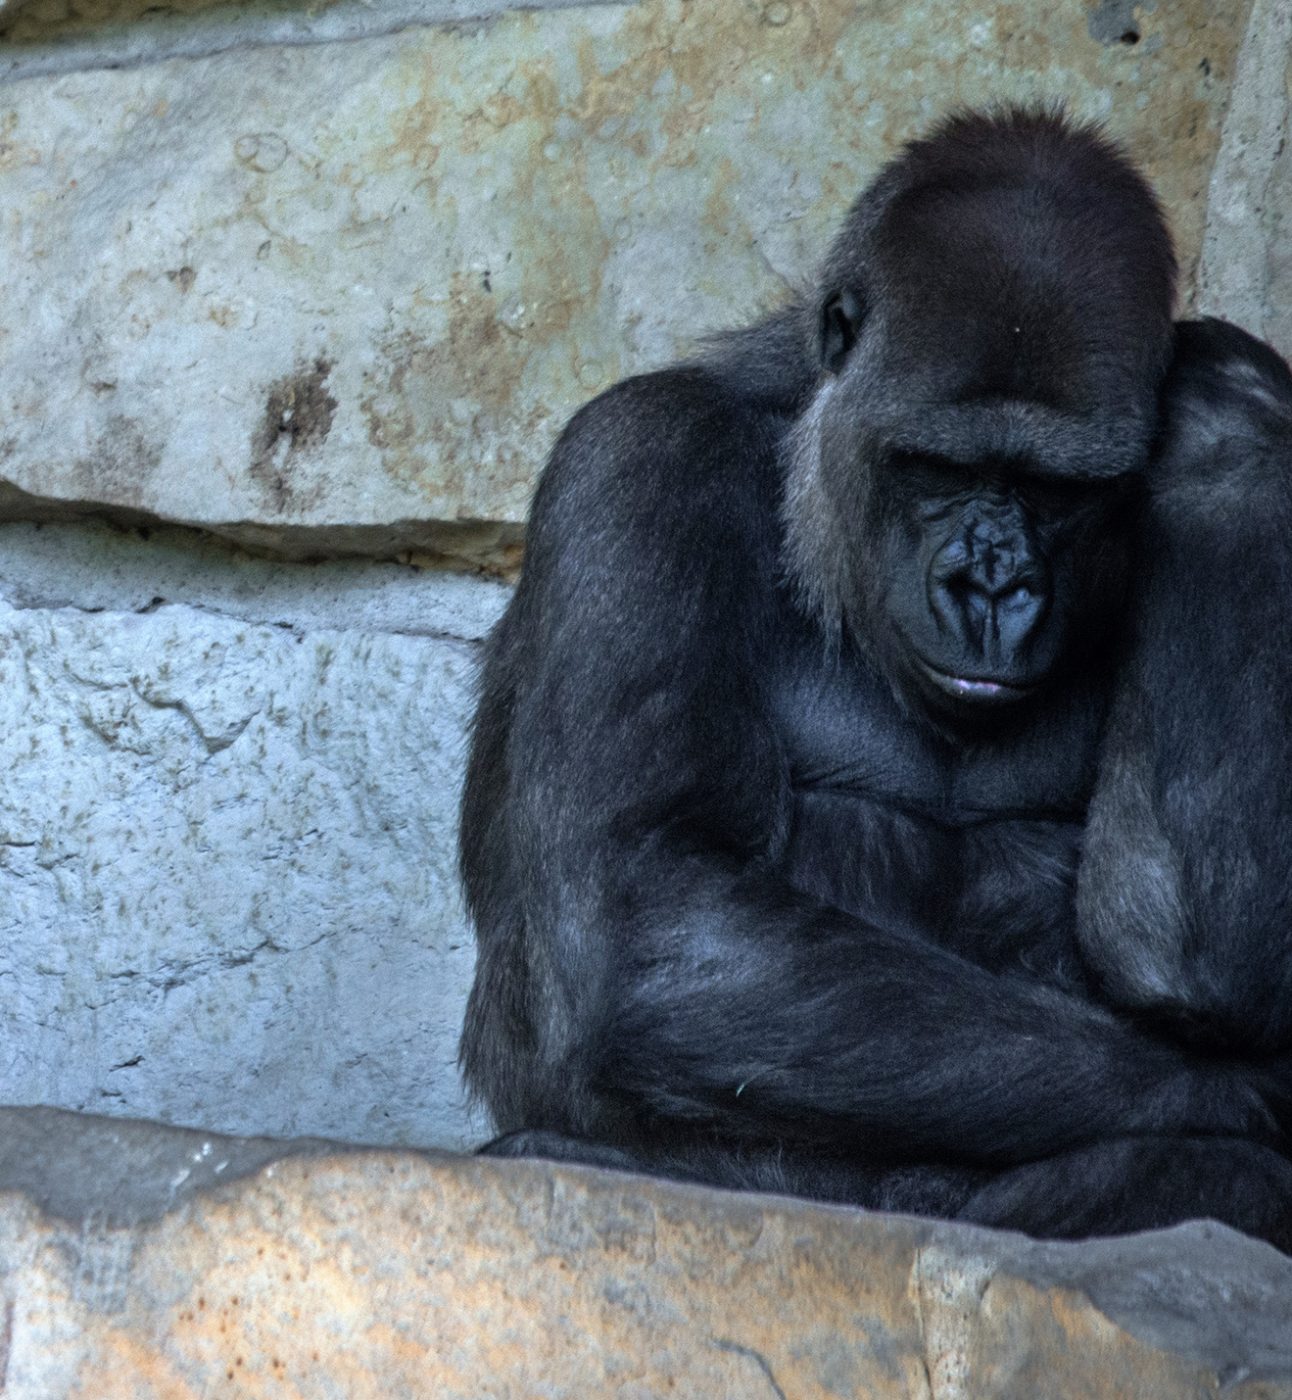 A gorilla with arms folding rocking itself